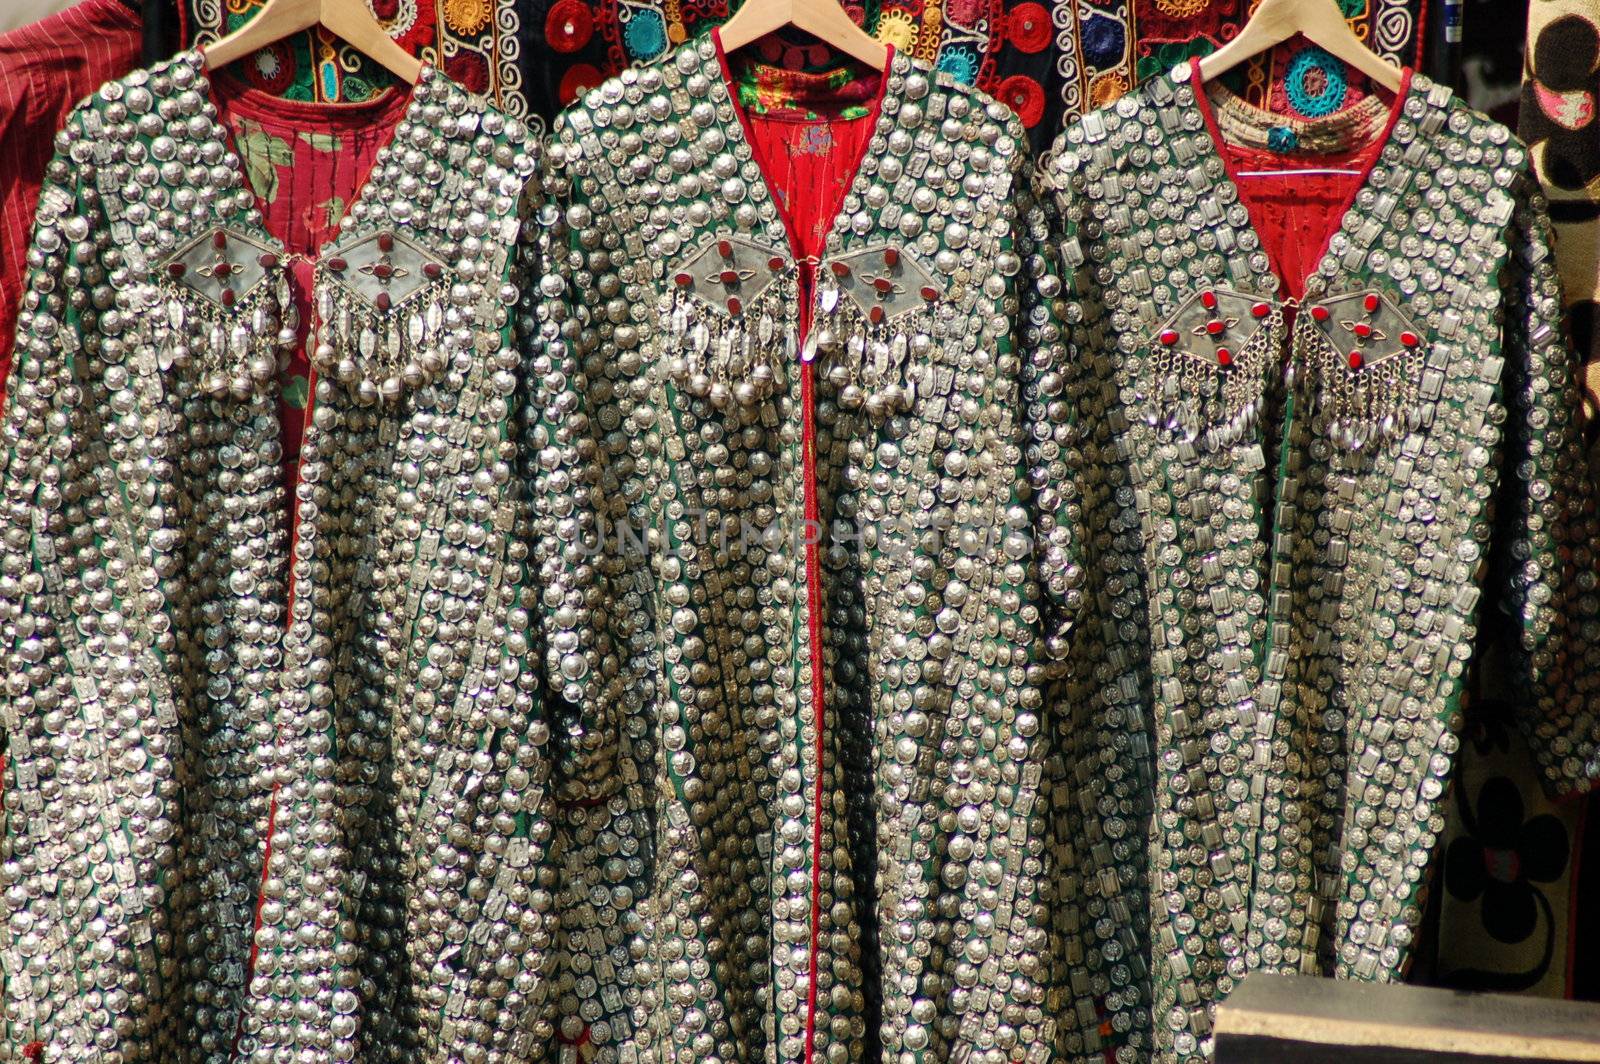 Three chain-mail capes hanging on clothes hangers in Camden Market